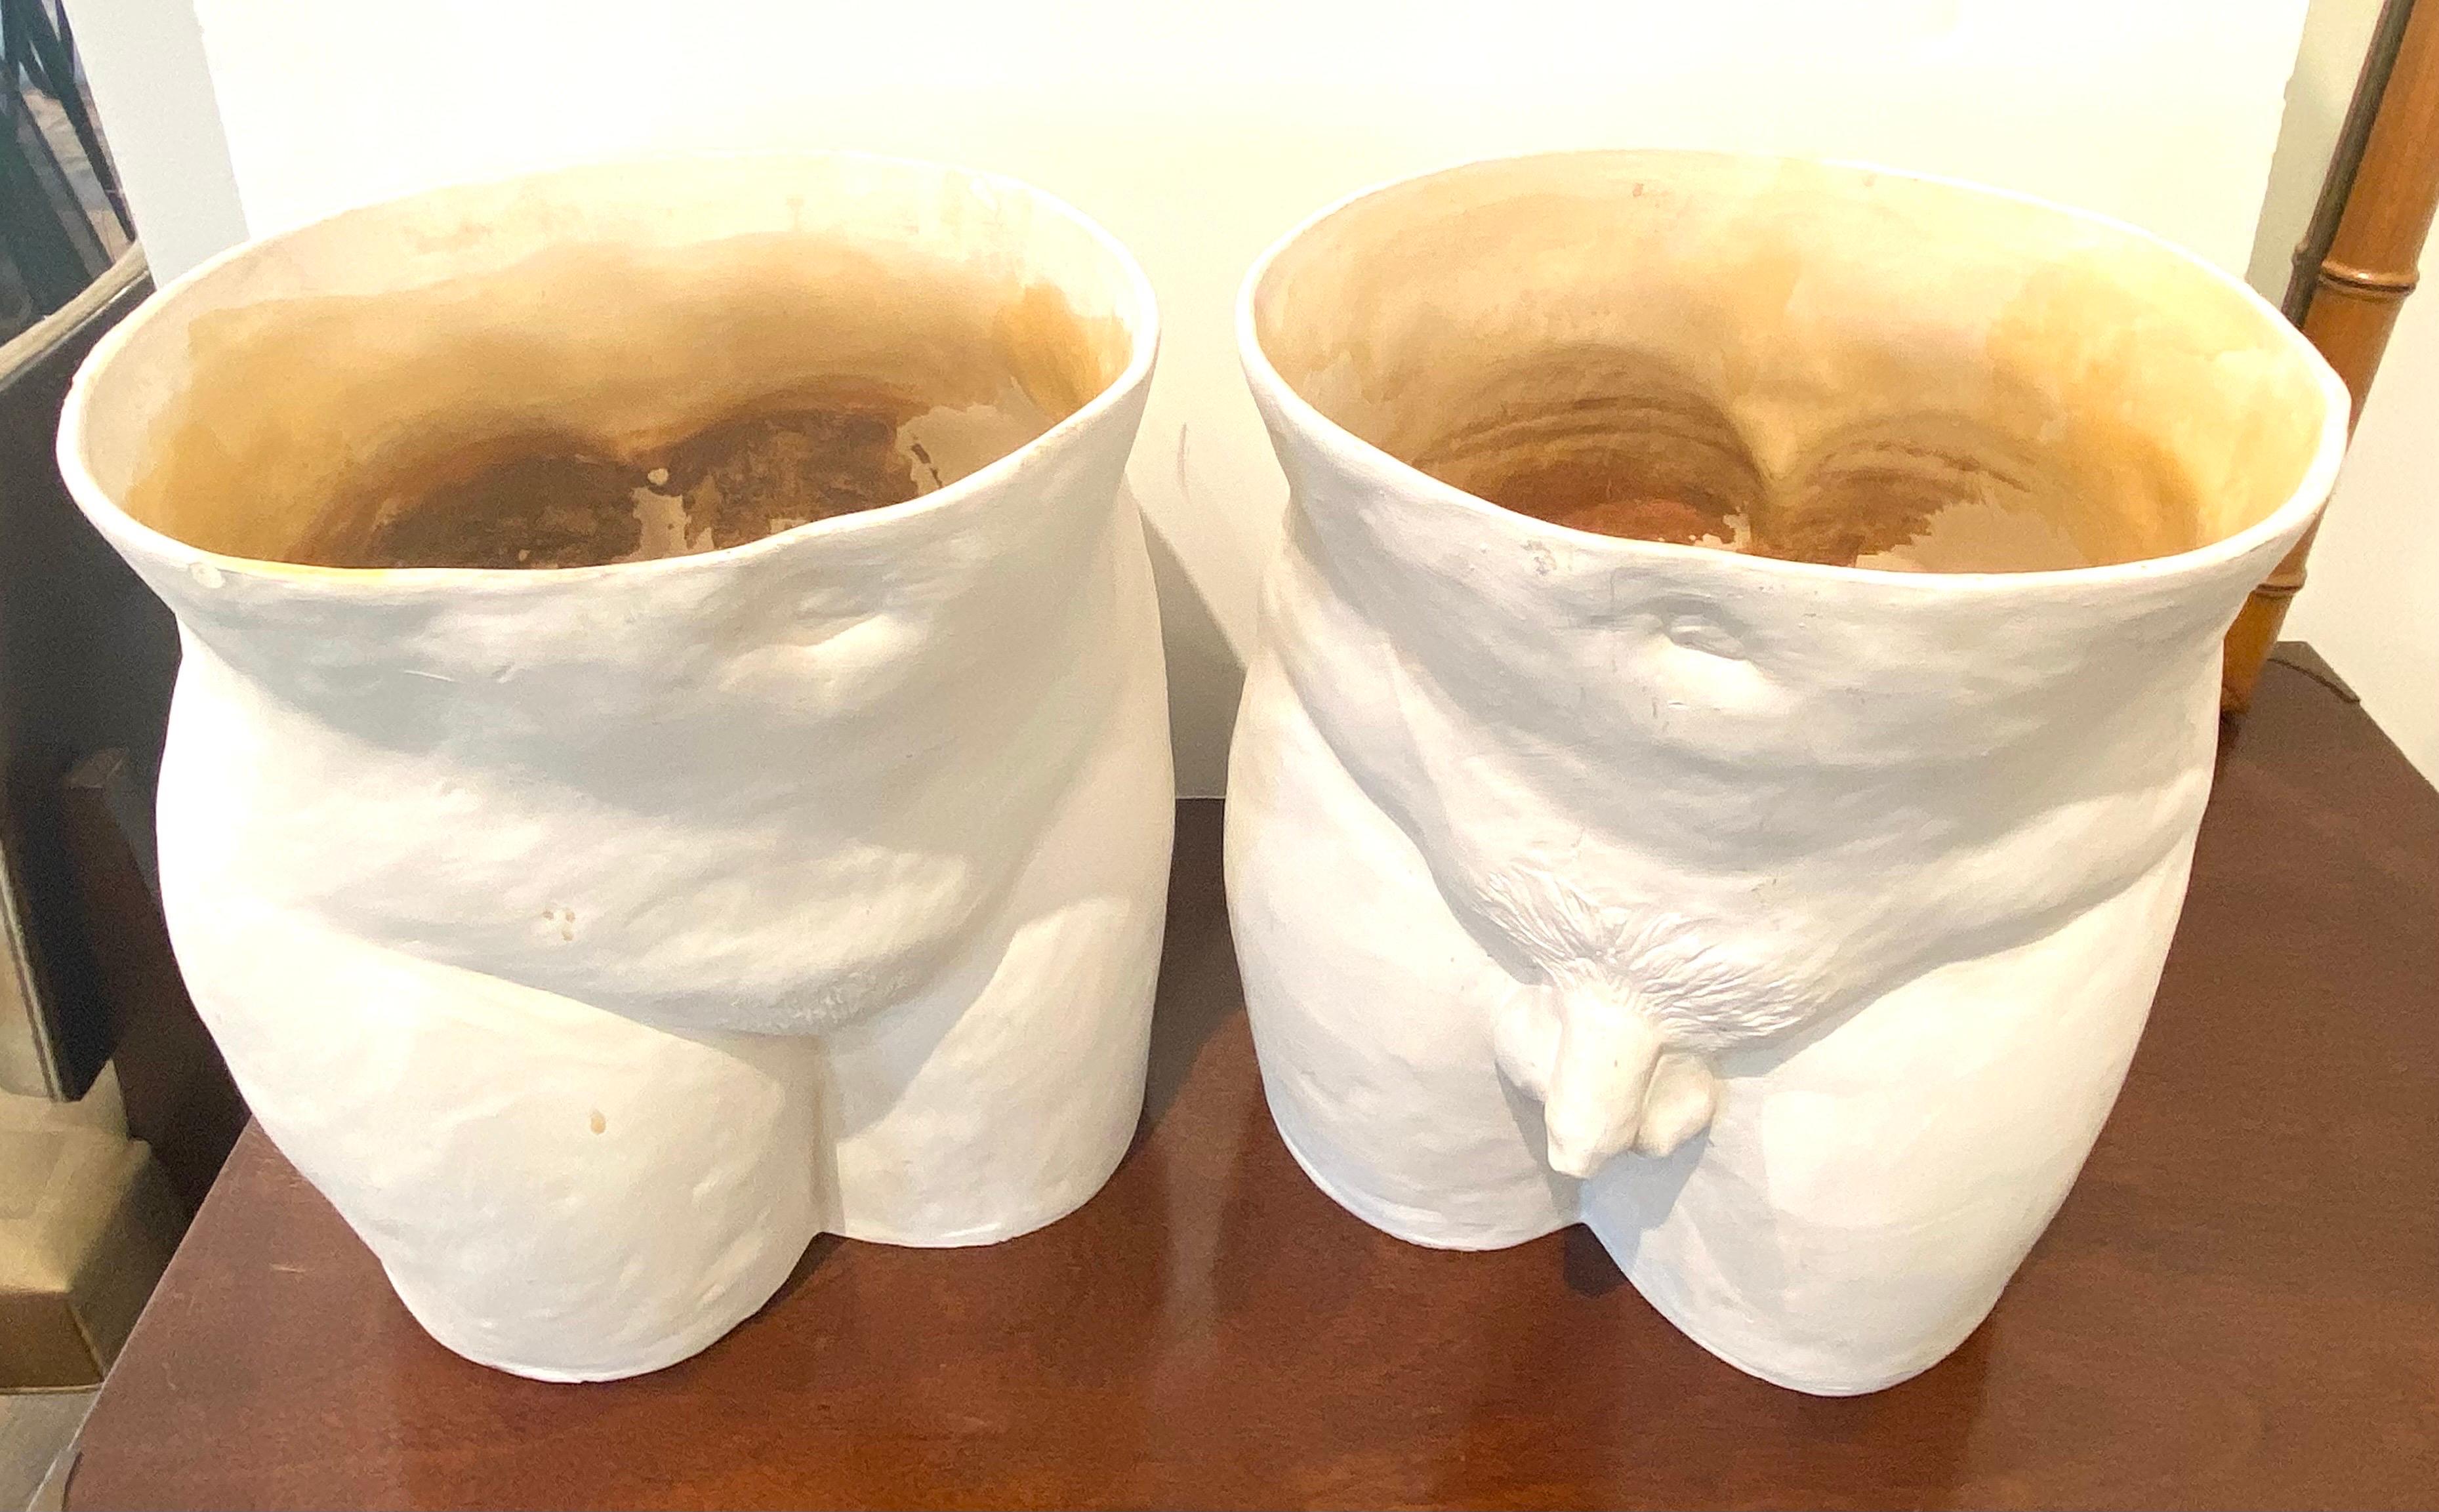 Unique pair of bisque planters. one is of a male buttock and genitalia, the second is of a female buttock and genitalia.